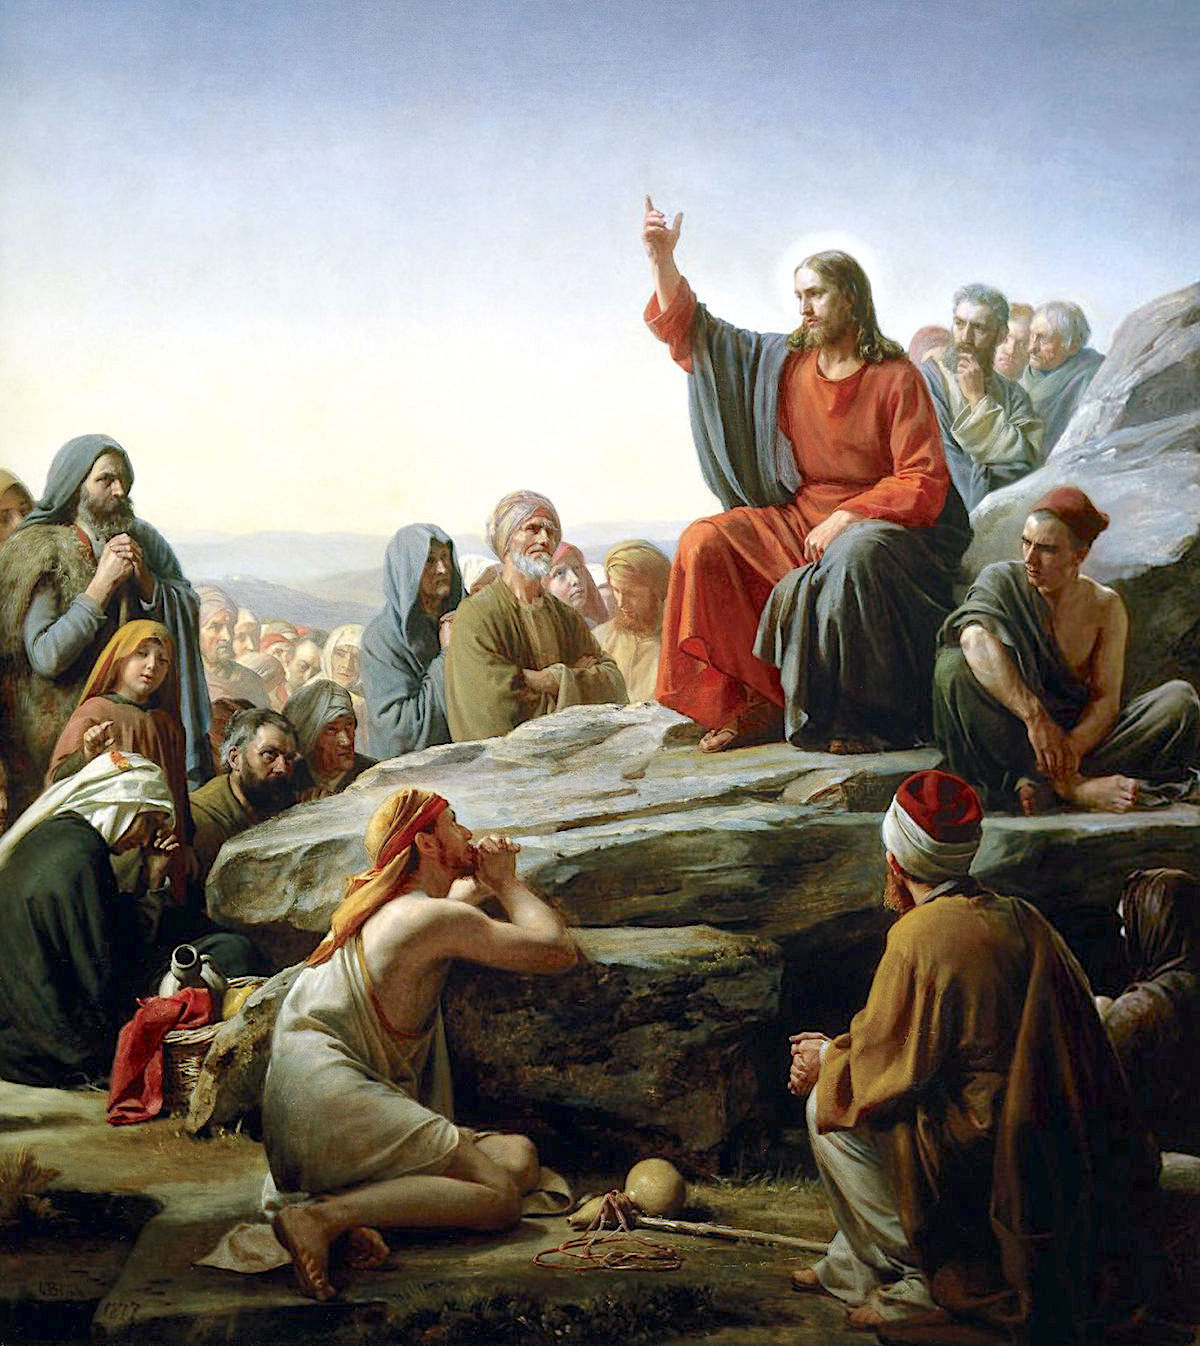 Jesus Rebukes the Unclean Spirit
in the Synagogue